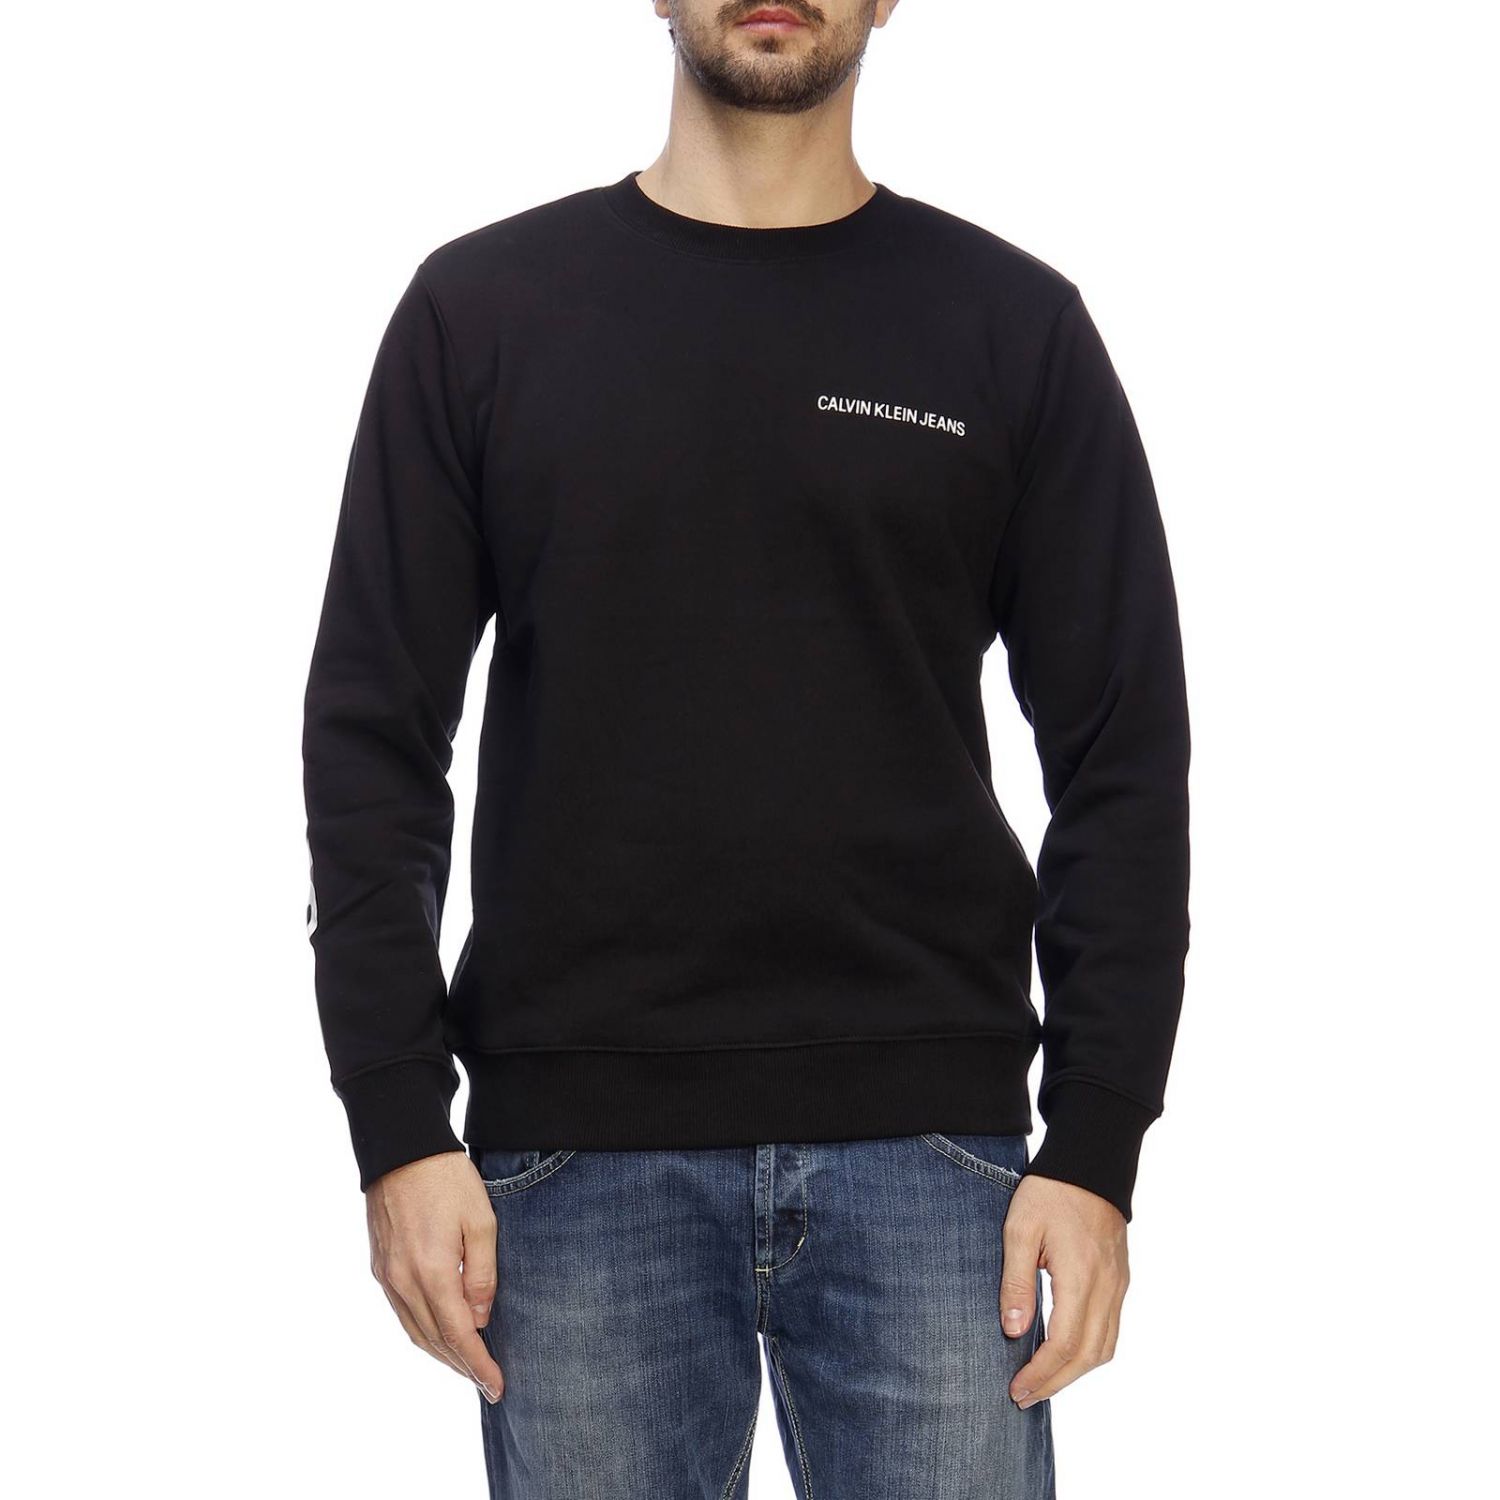 Klein sweater for man - Black | Calvin Jeans sweater J30J310343 online on GIGLIO.COM